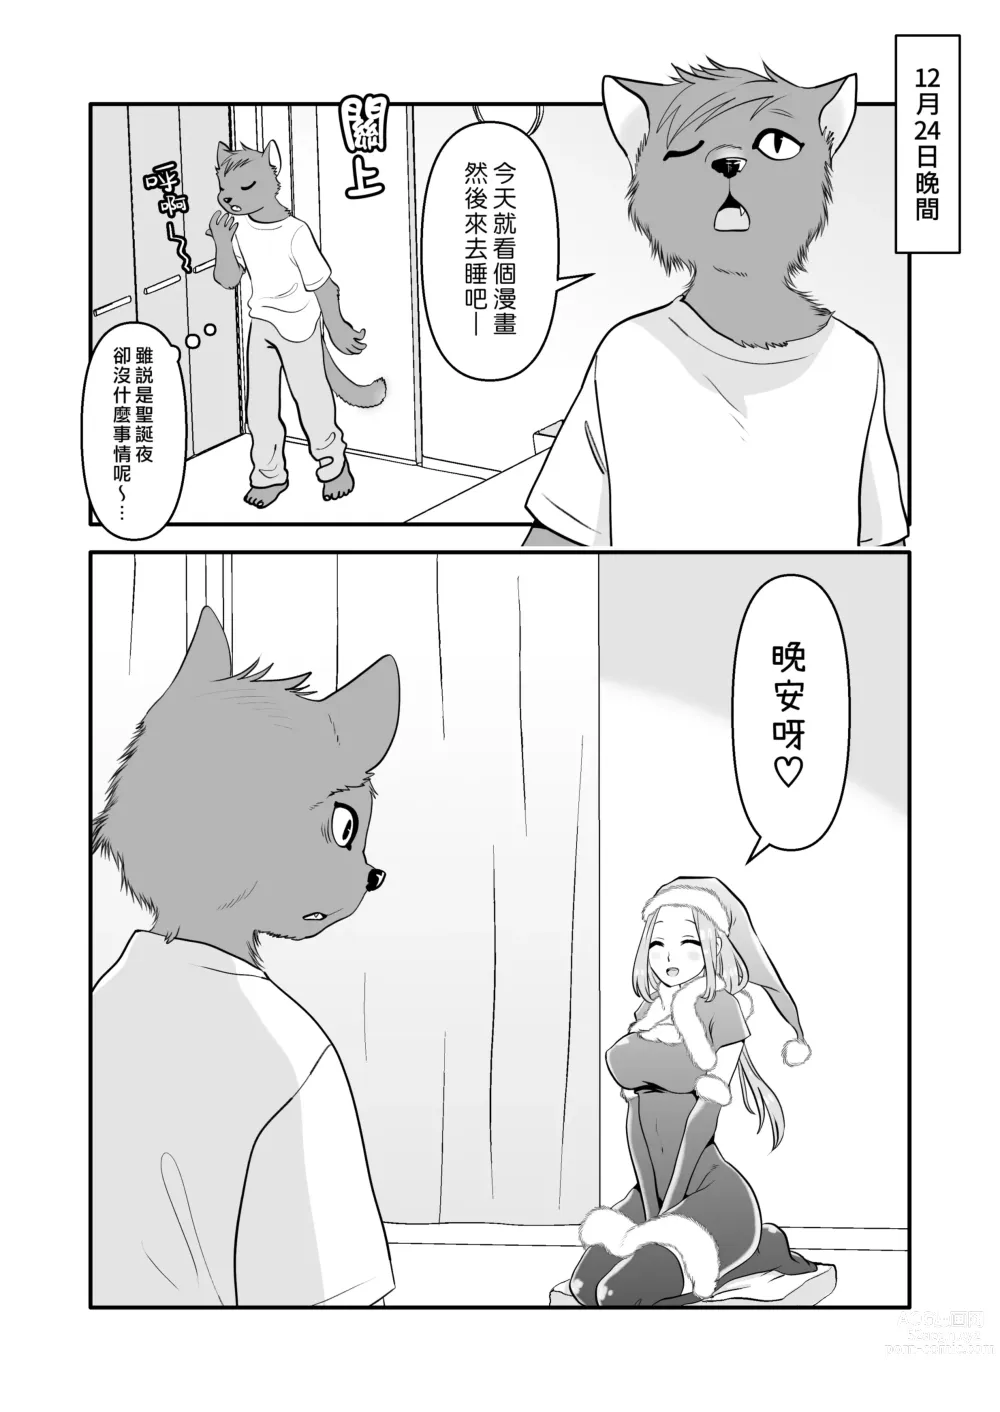 Page 5 of doujinshi 獸人君與聖誕大姊姊